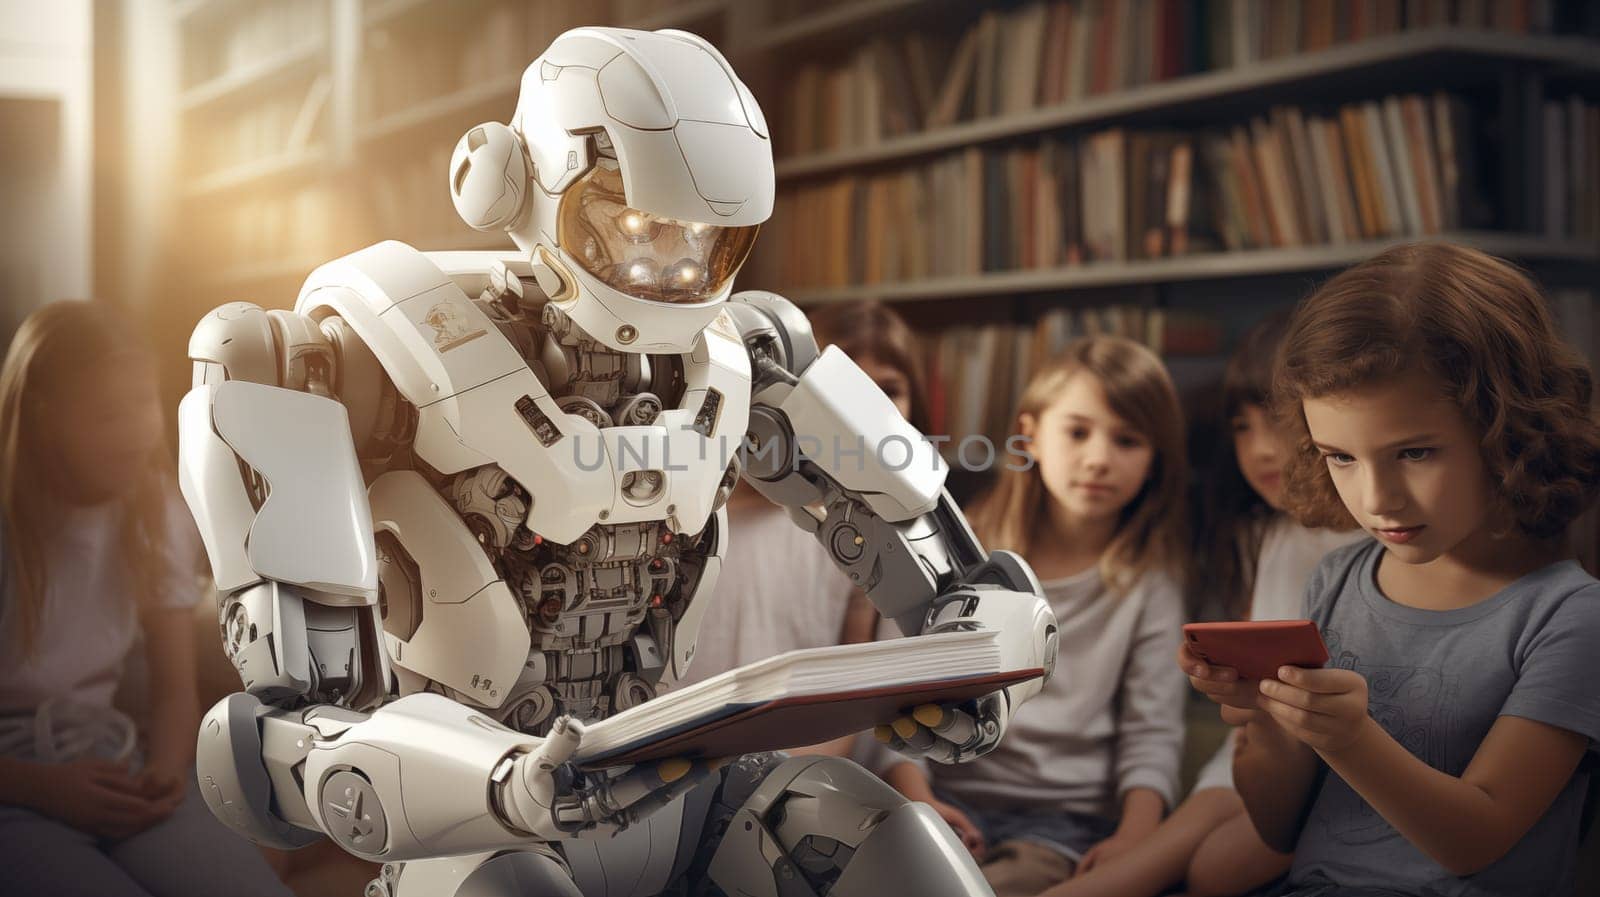 A humanoid robot interacts with a group of fascinated children reading a book, illustrating modern education and technology in a classroom setting.